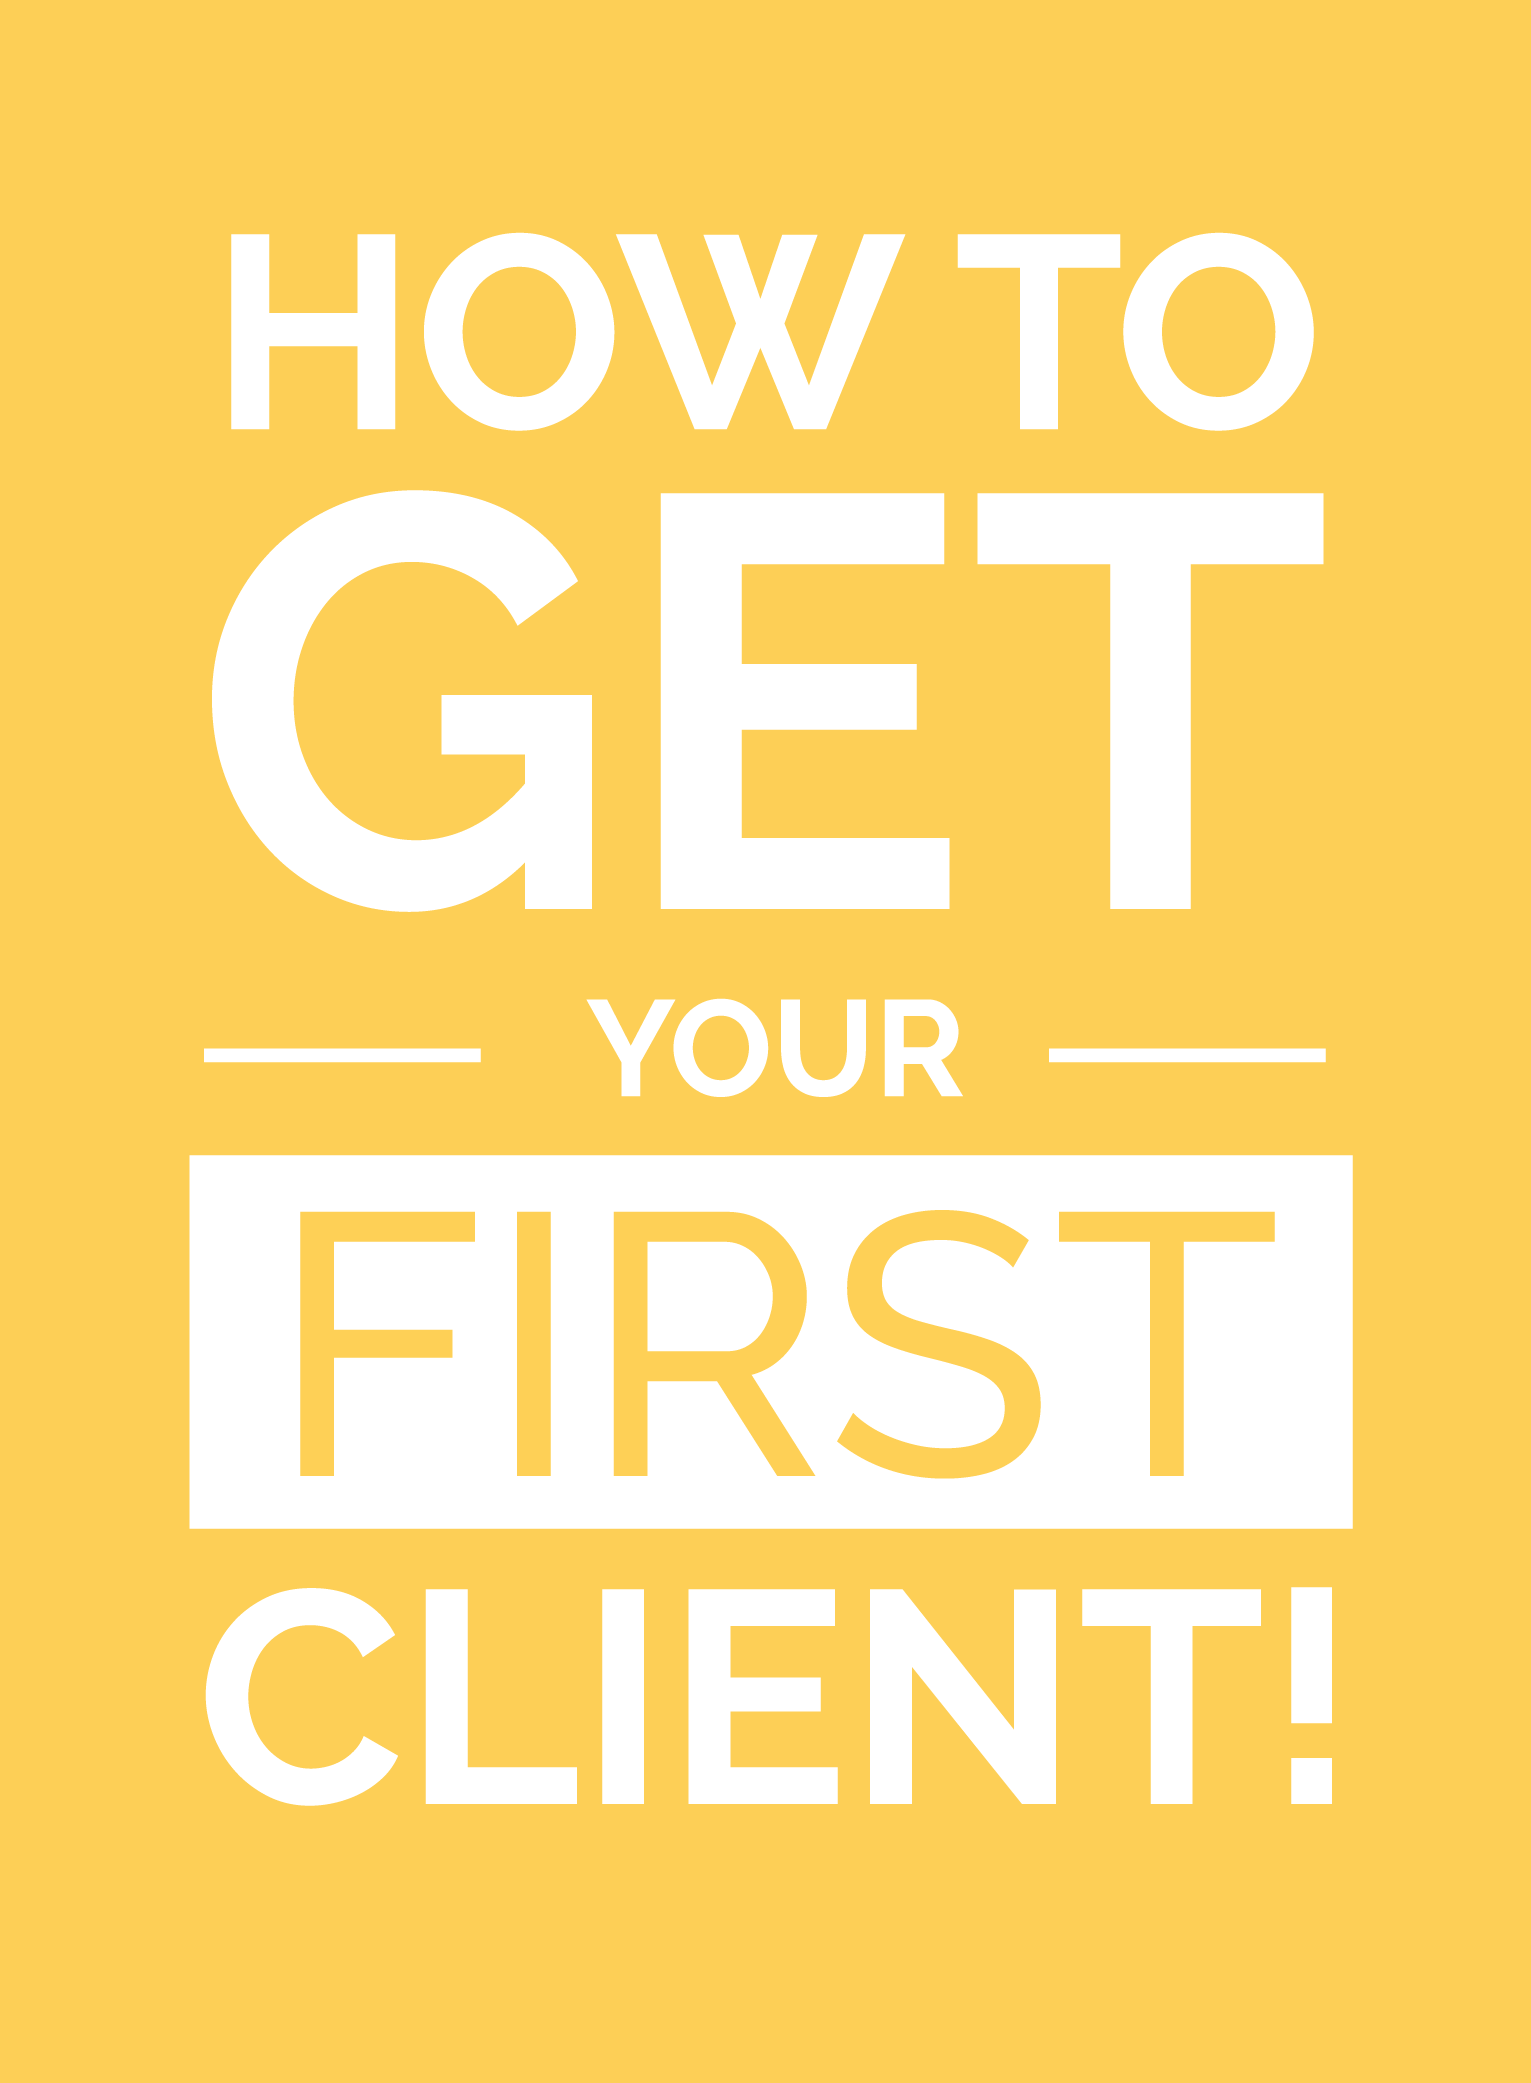 How to get your FIRST paying client!